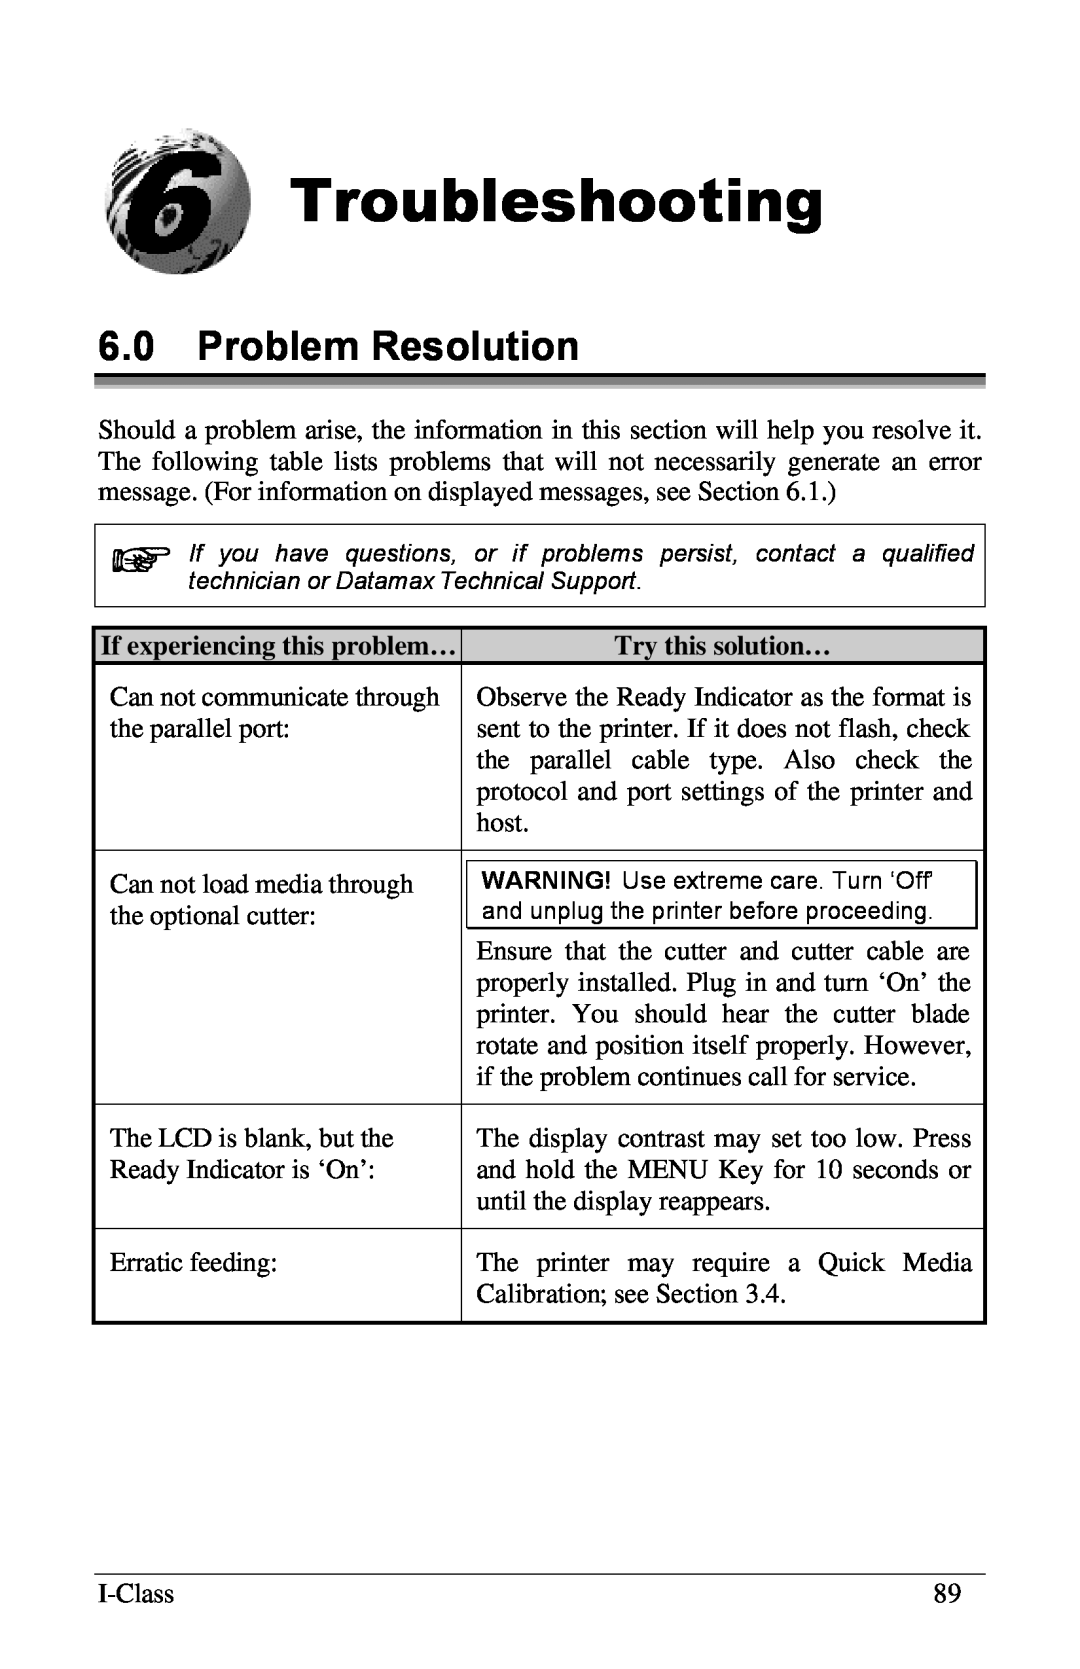 Xerox I Class manual Troubleshooting, 6.0Problem Resolution, If experiencing this problem…, Try this solution… 